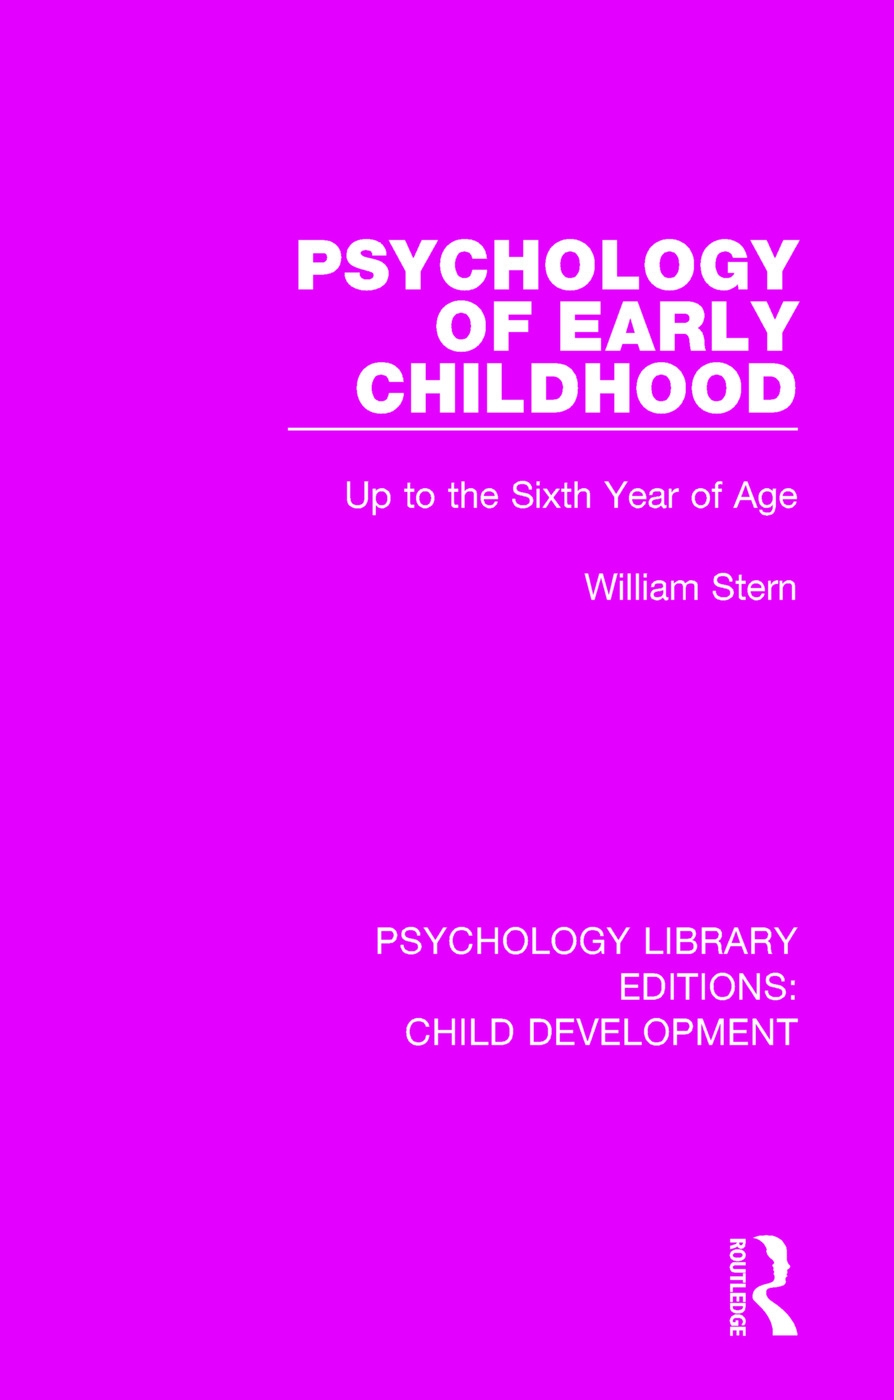 Psychology of Early Childhood: Up to the Sixth Year of Age